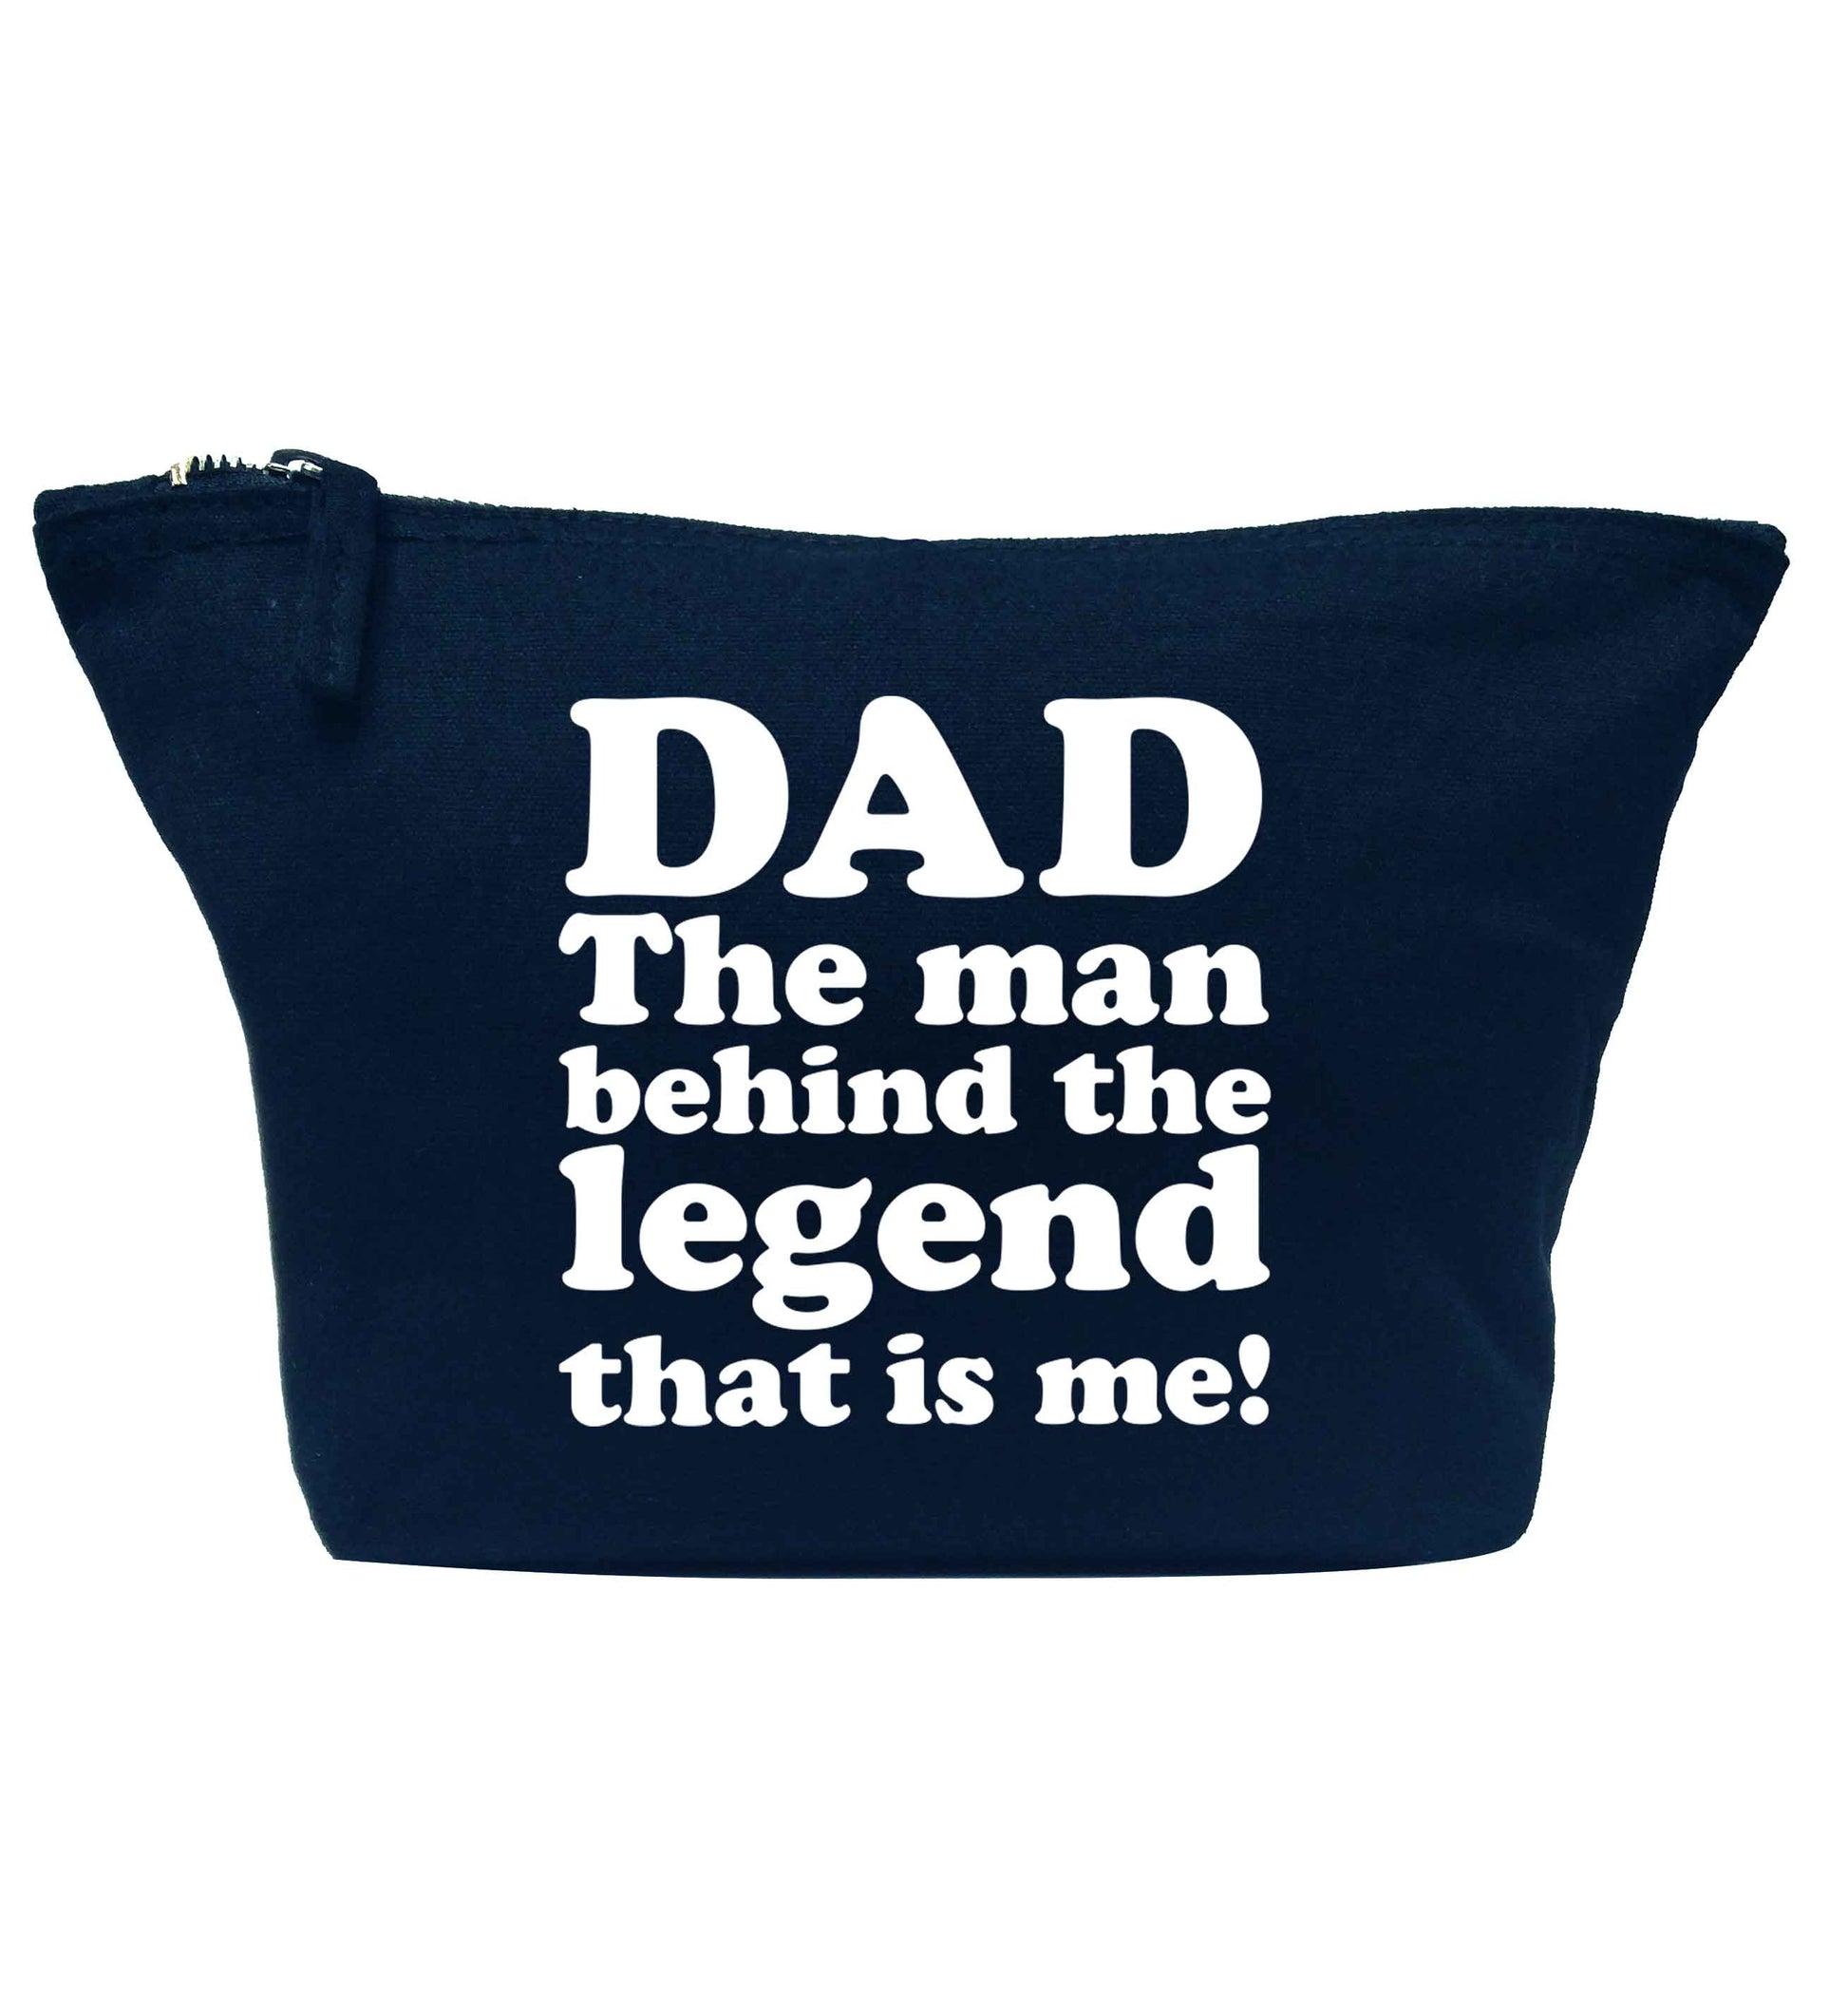 Dad the man behind the legend that is me navy makeup bag